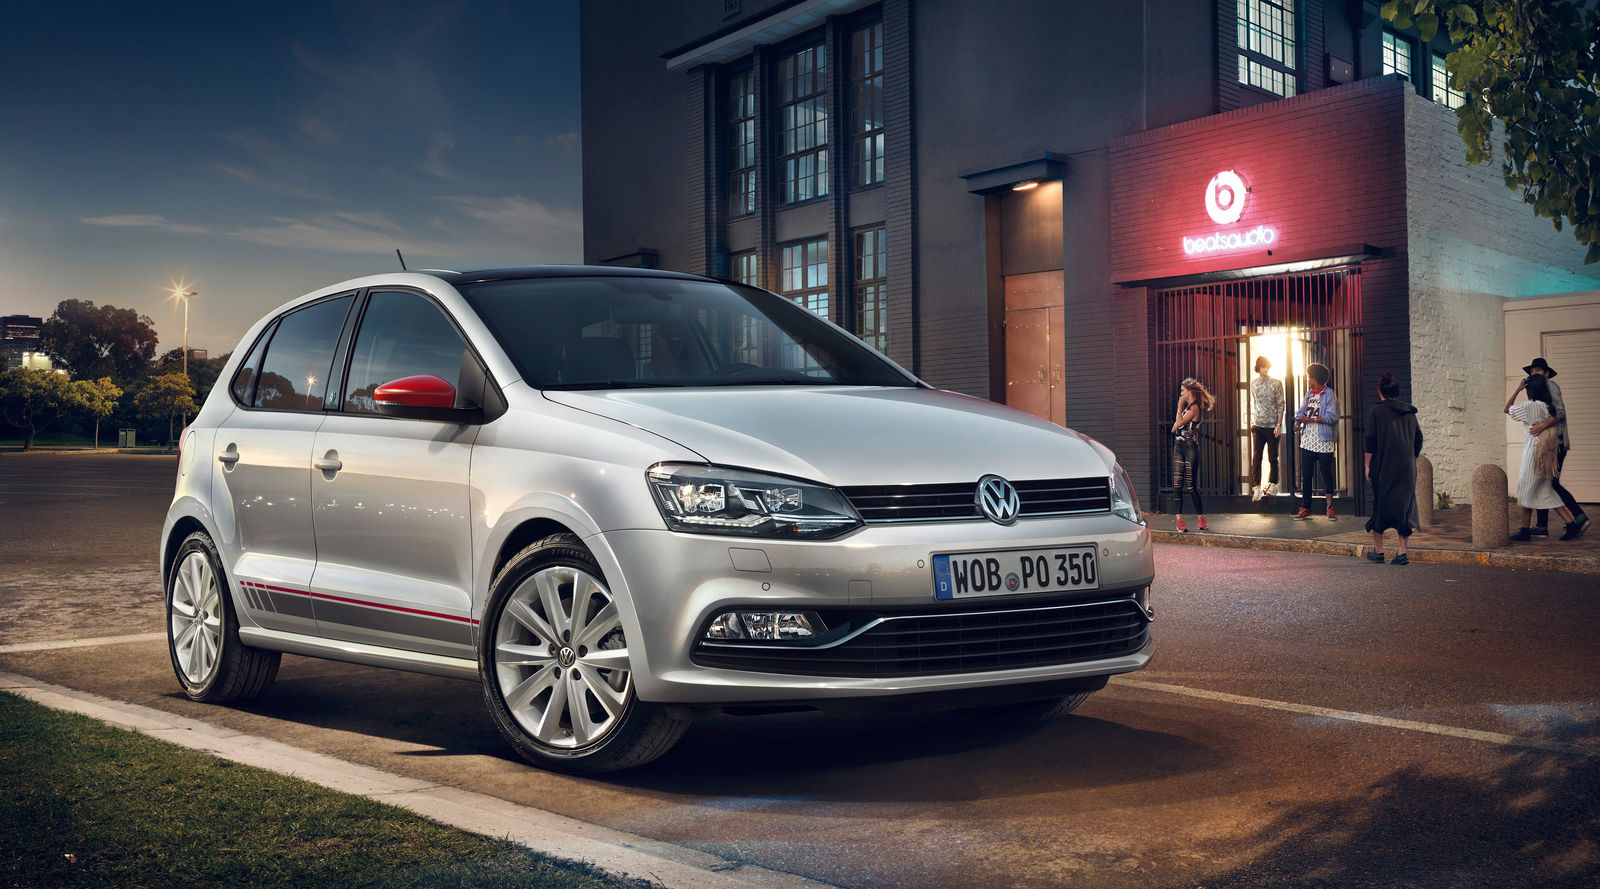 big sound in a small car: New Polo beats is available order now | Volkswagen Newsroom